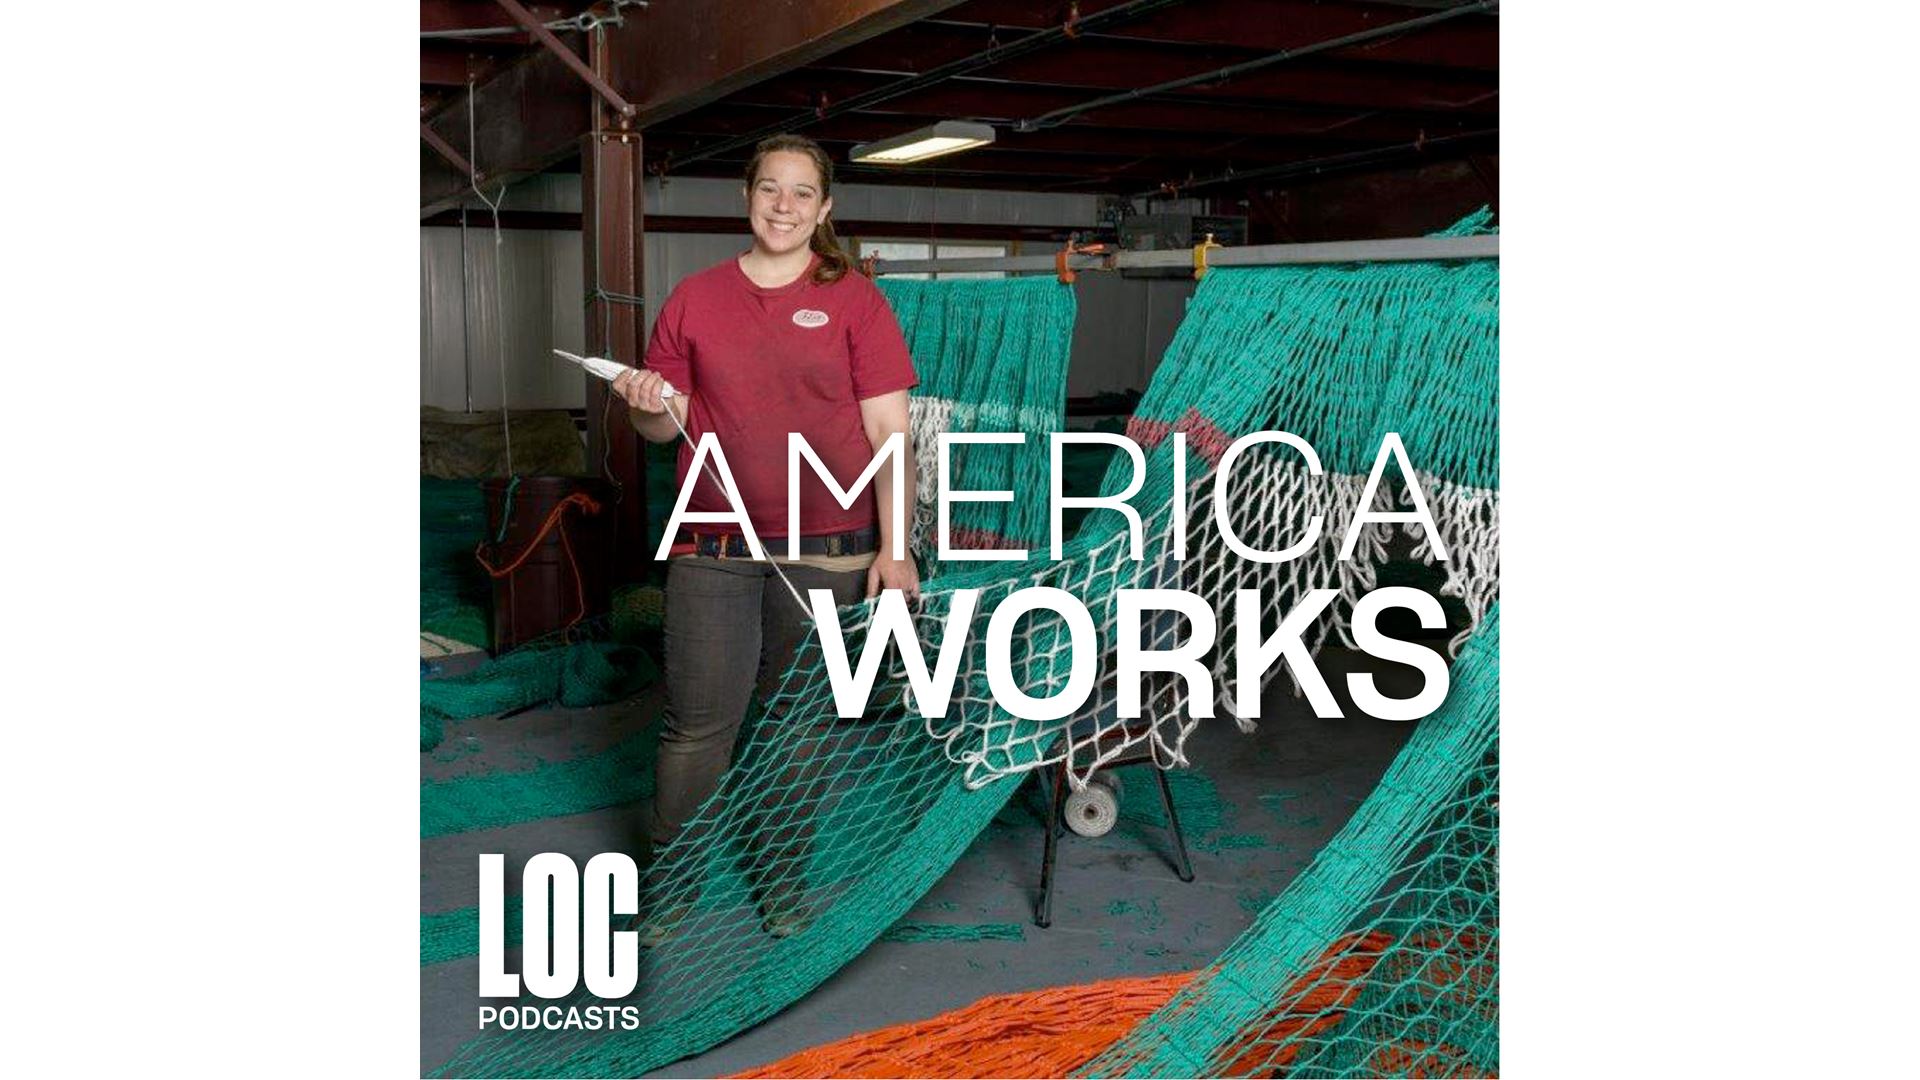 Library of Congress Releases Fourth Season of “America Works” Podcast